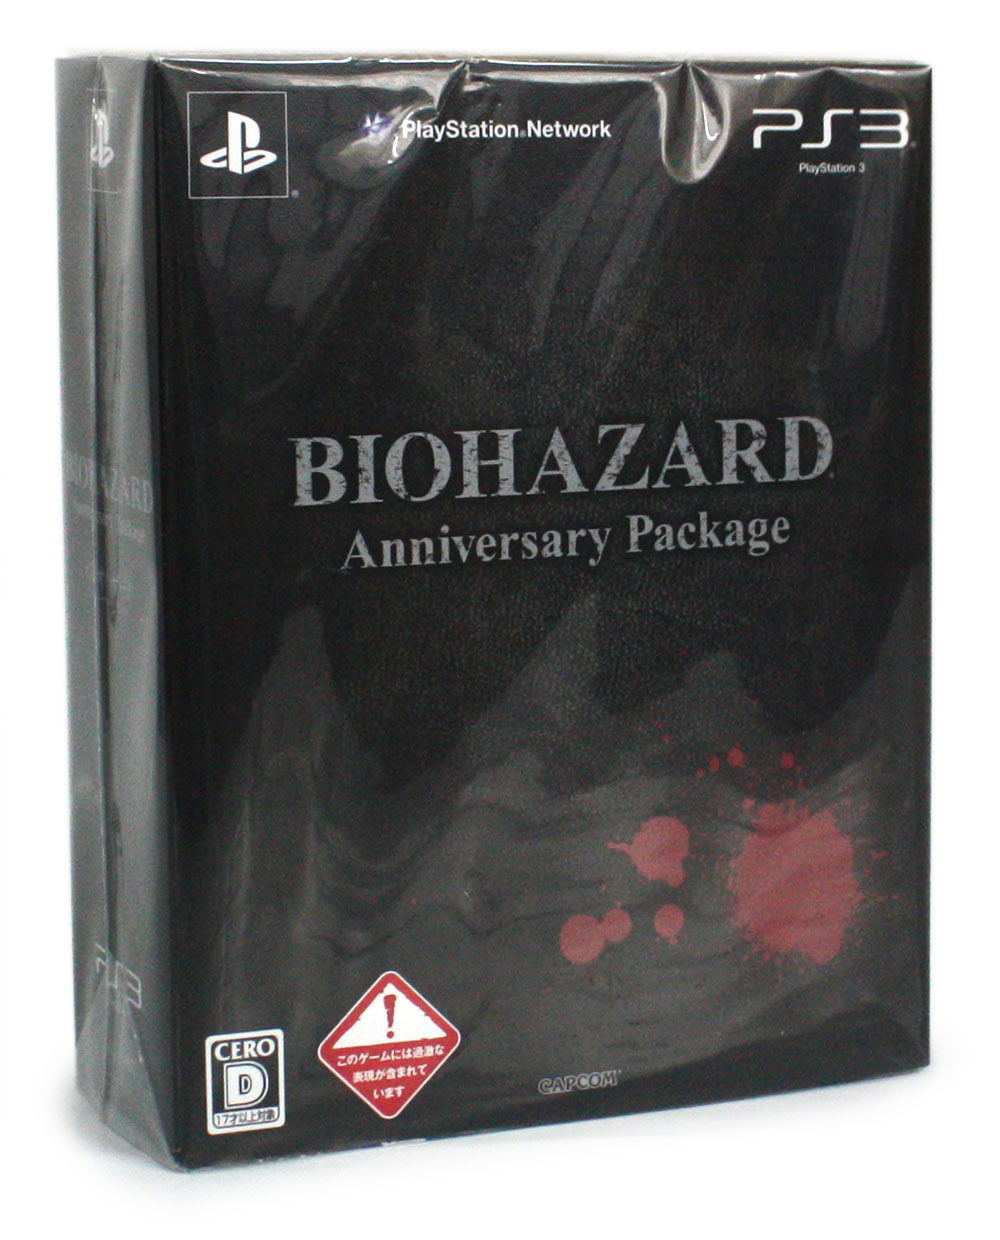 BioHazard Anniversary Package for PlayStation 3